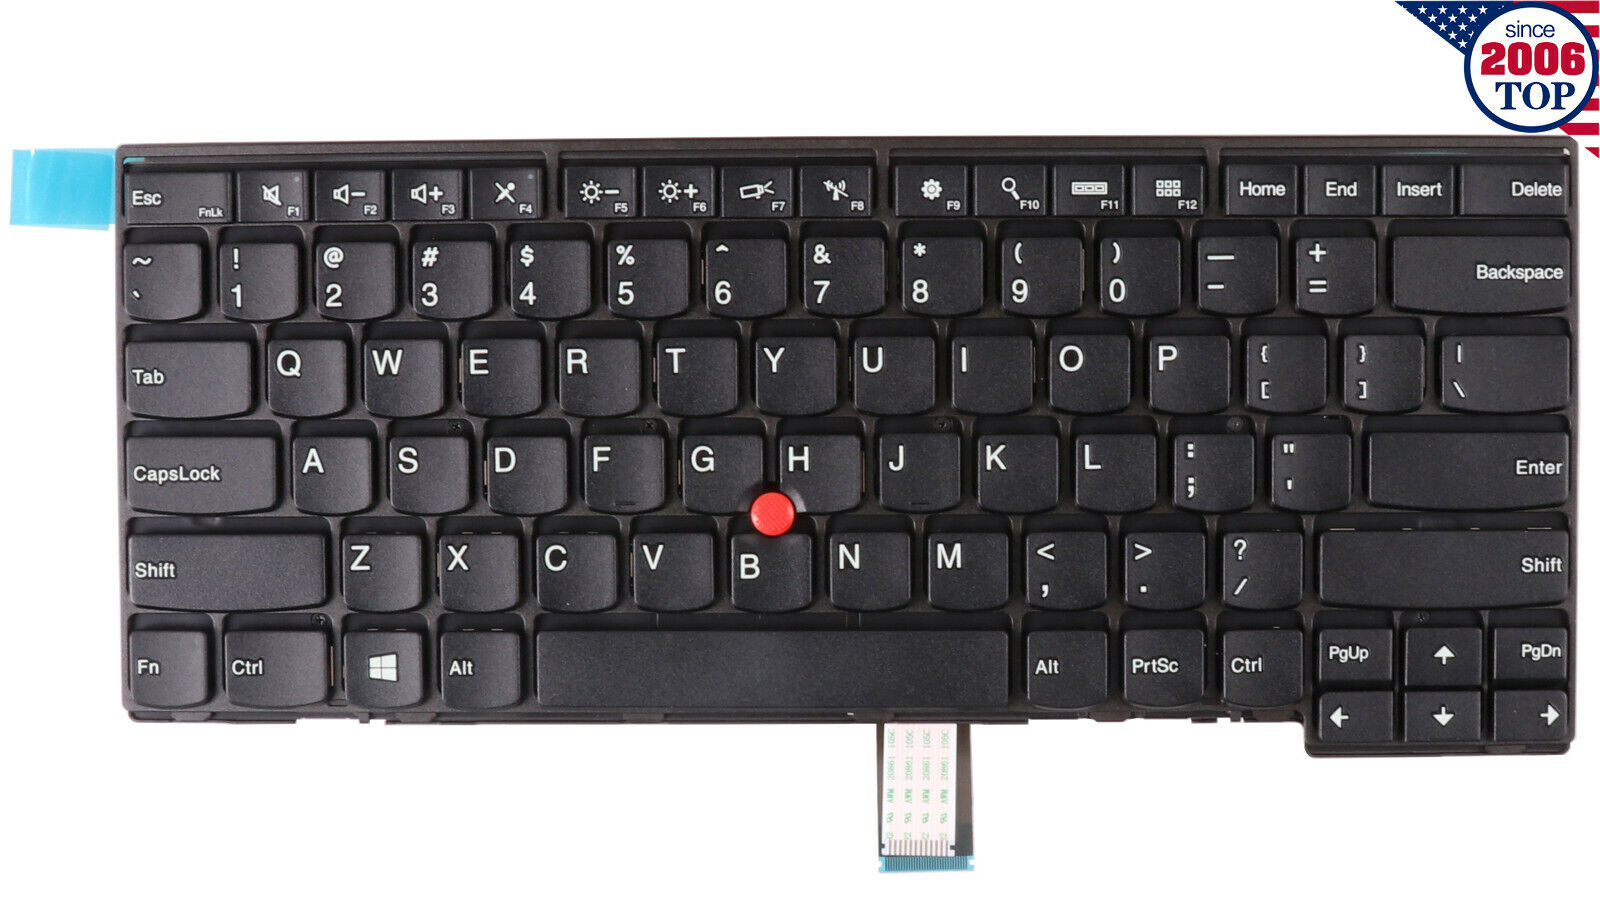 OEM Thinkpad us Keyboard E431 T440 T440P T440S T450 T450S T460 (Not For T460s)